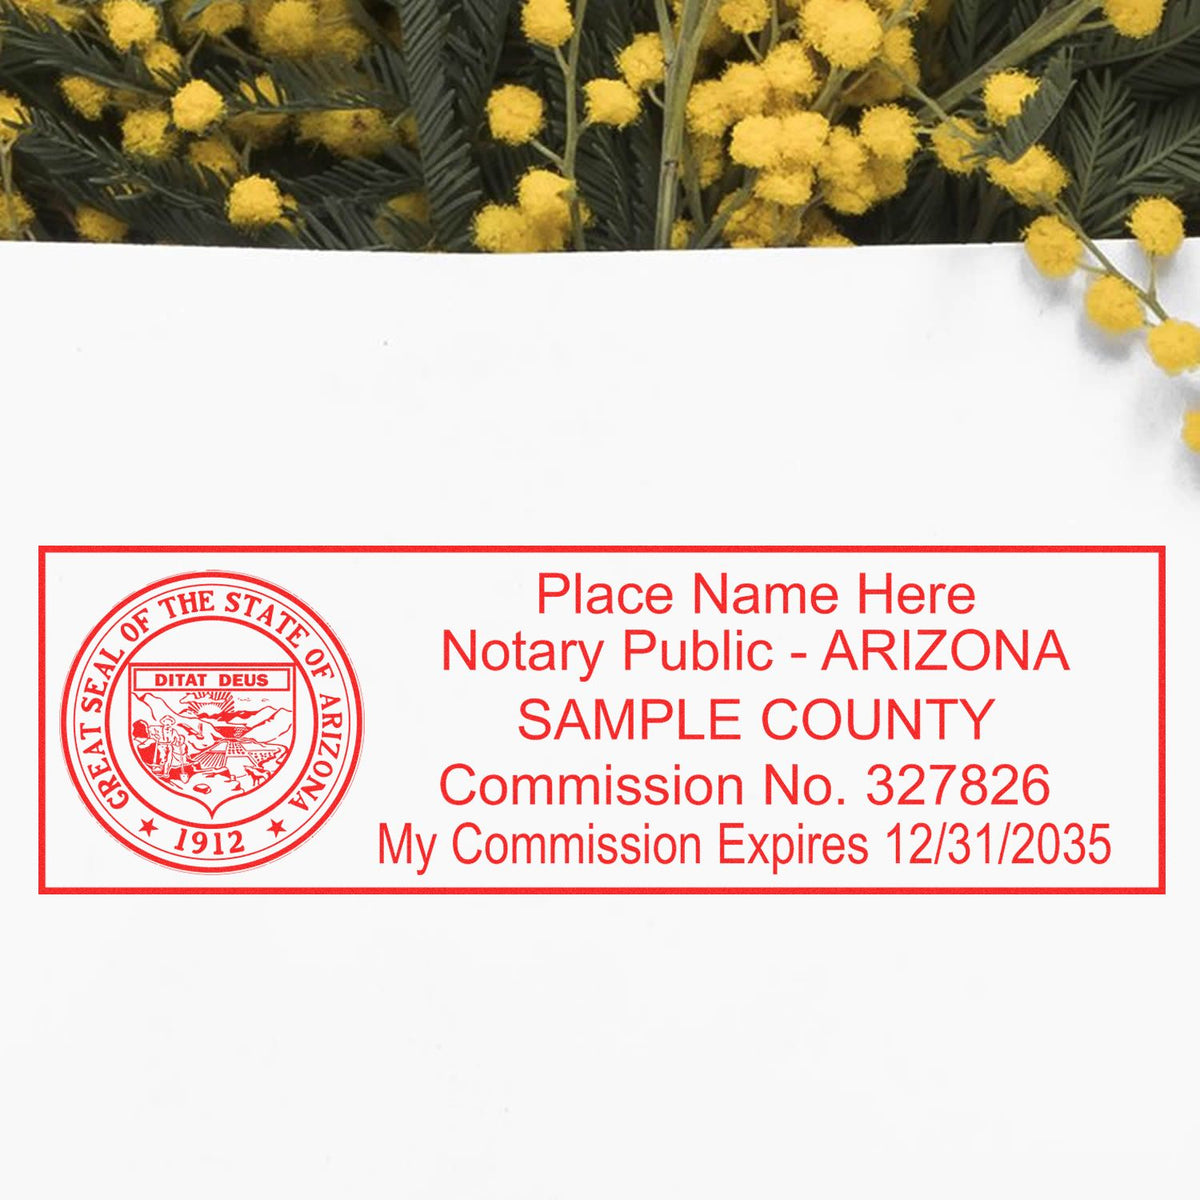 Another Example of a stamped impression of the Super Slim Arizona Notary Public Stamp on a piece of office paper.